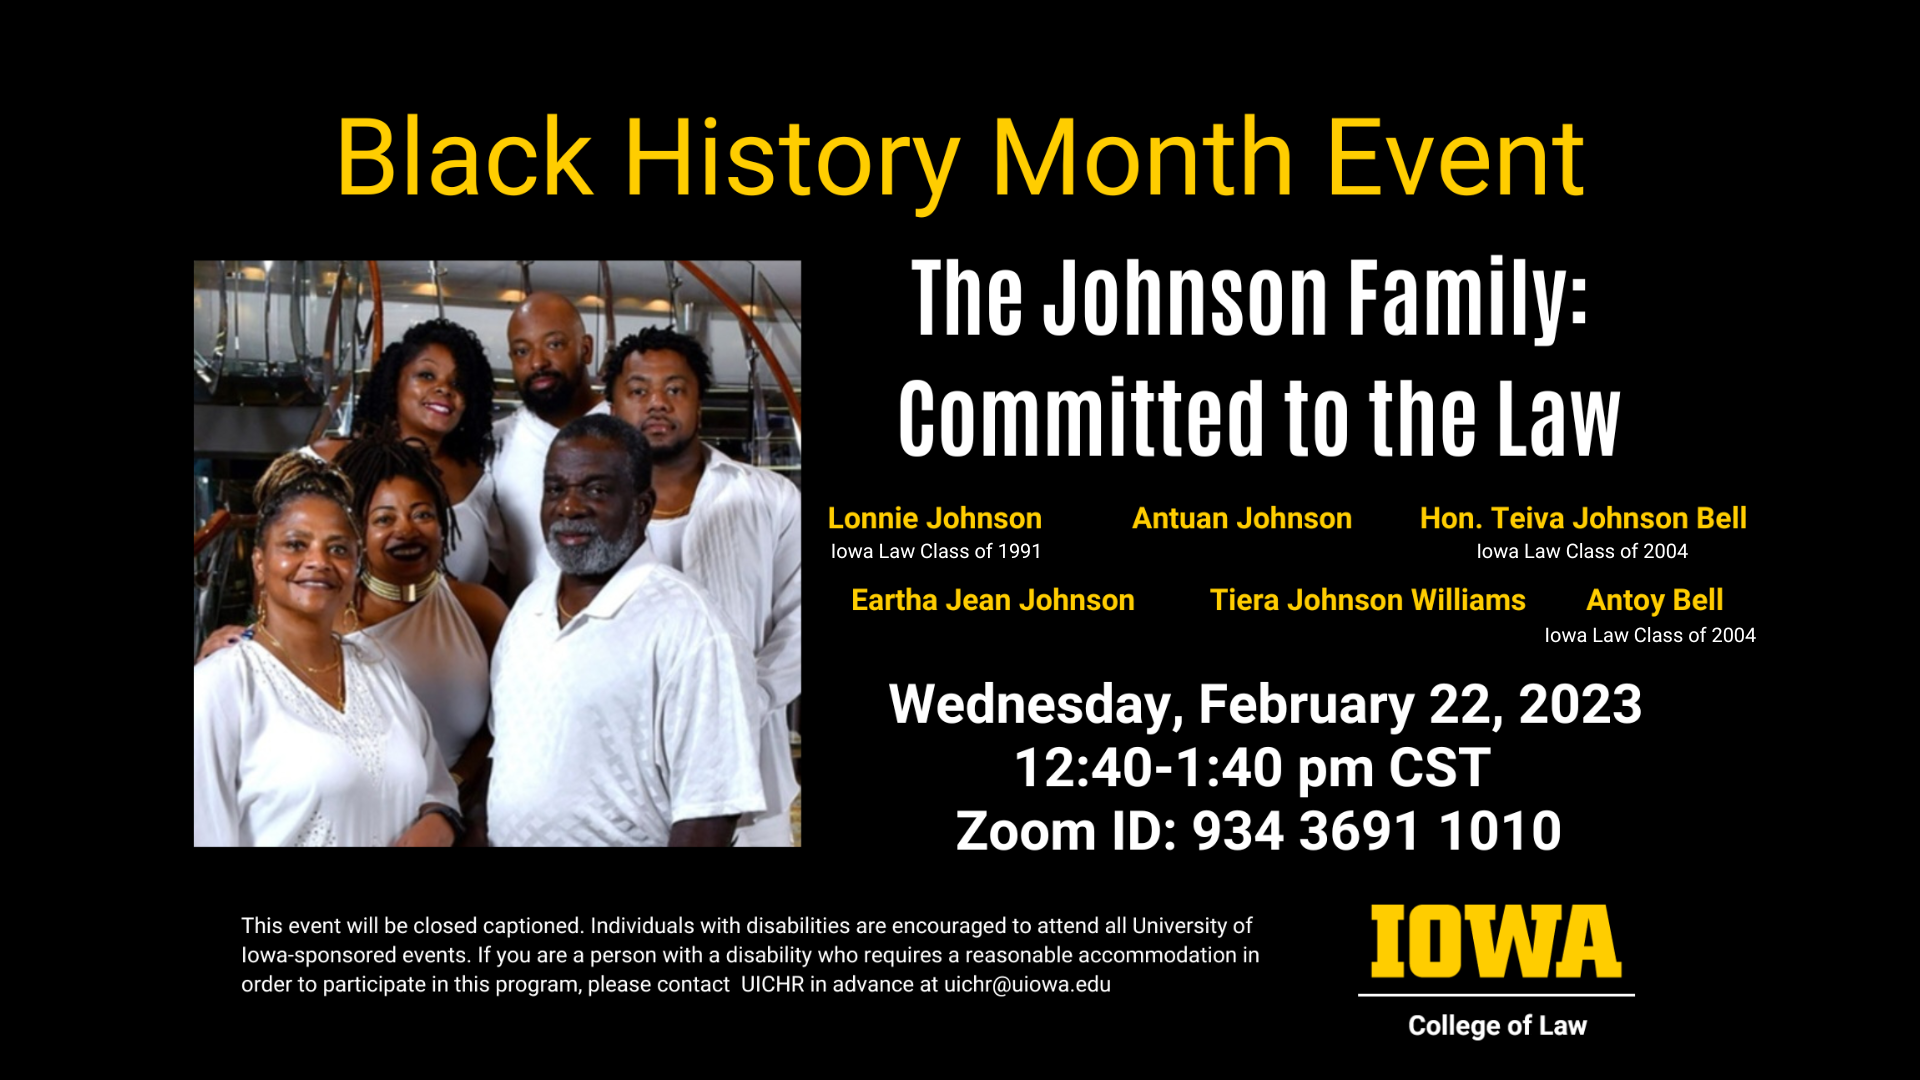 Black History Month Event: The Johnson Family: Committed to the Law. Wednesday, Feb 22, 2023 @ 12:40 PM to 1:40 PM CST. Zoom ID: 93436911010